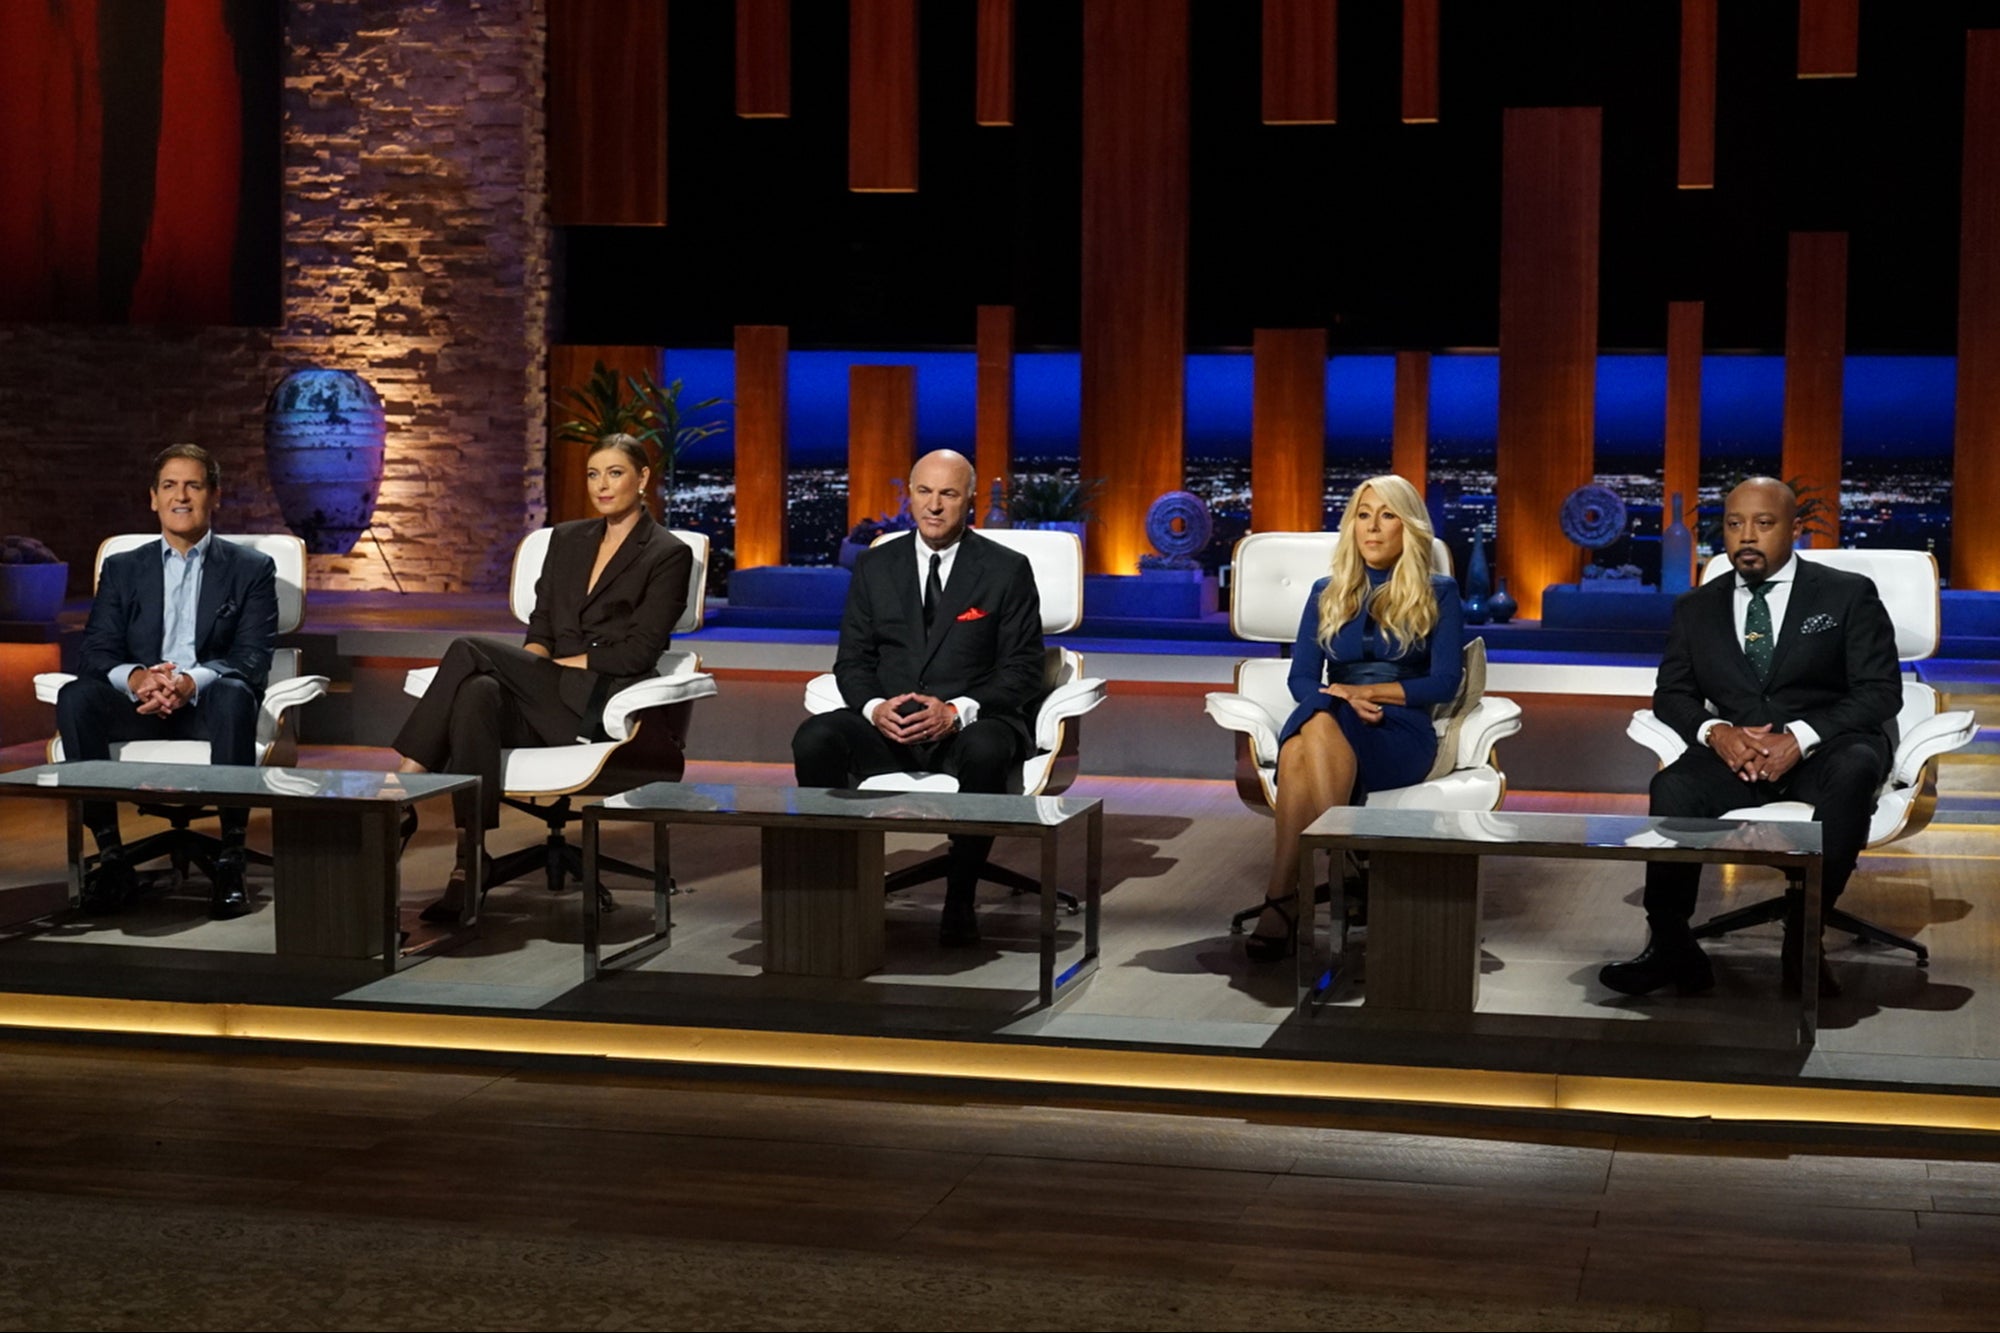 Thinking of Pitching Your New Business on Shark Tank? 5 Things to Consider Before You Take the Leap.